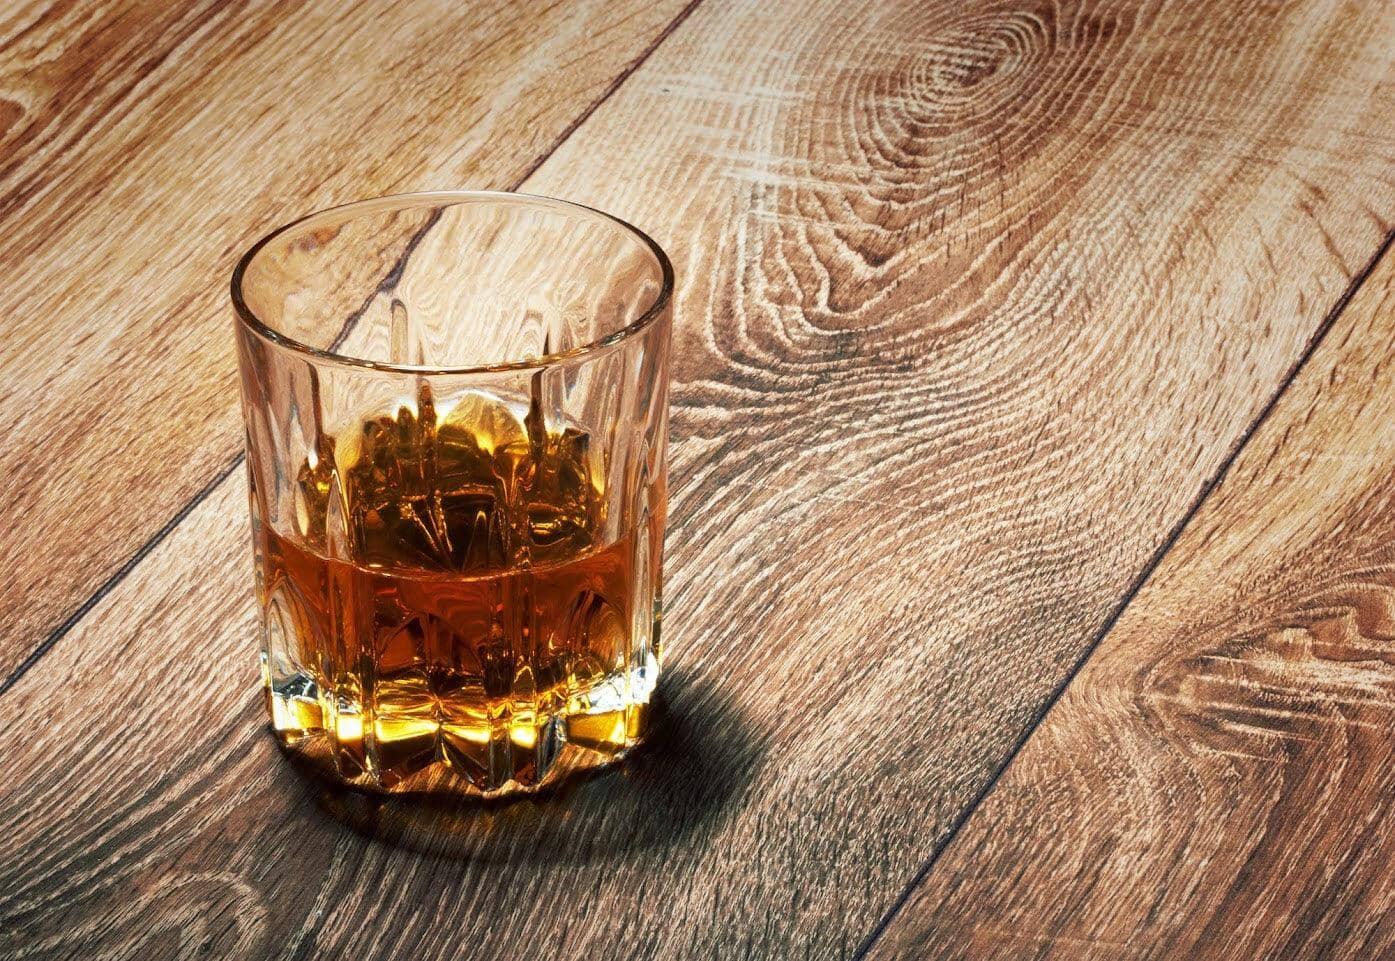 Common Whiskey Myths to Avoid - The Barrel Tap